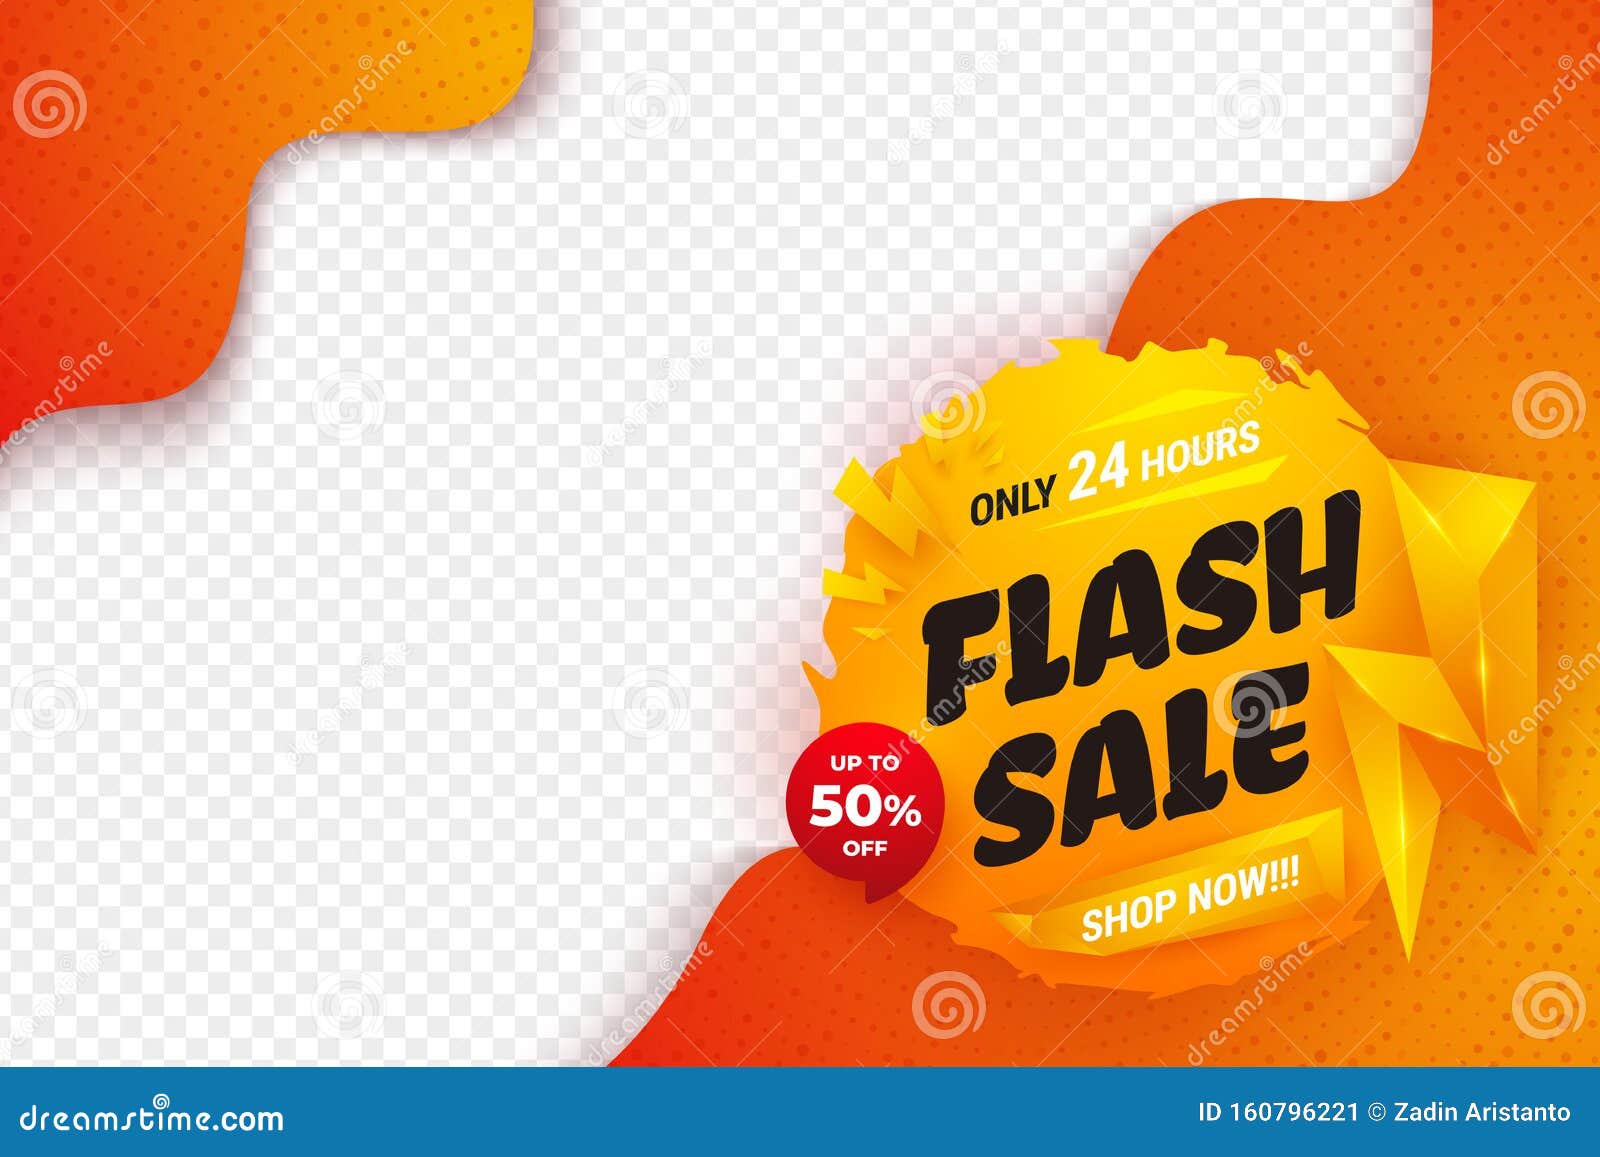 Flash Sale Background With Orange Yellow And Red Color Sale Banner Template Design Stock Vector Illustration Of Advertising Marketing 160796221